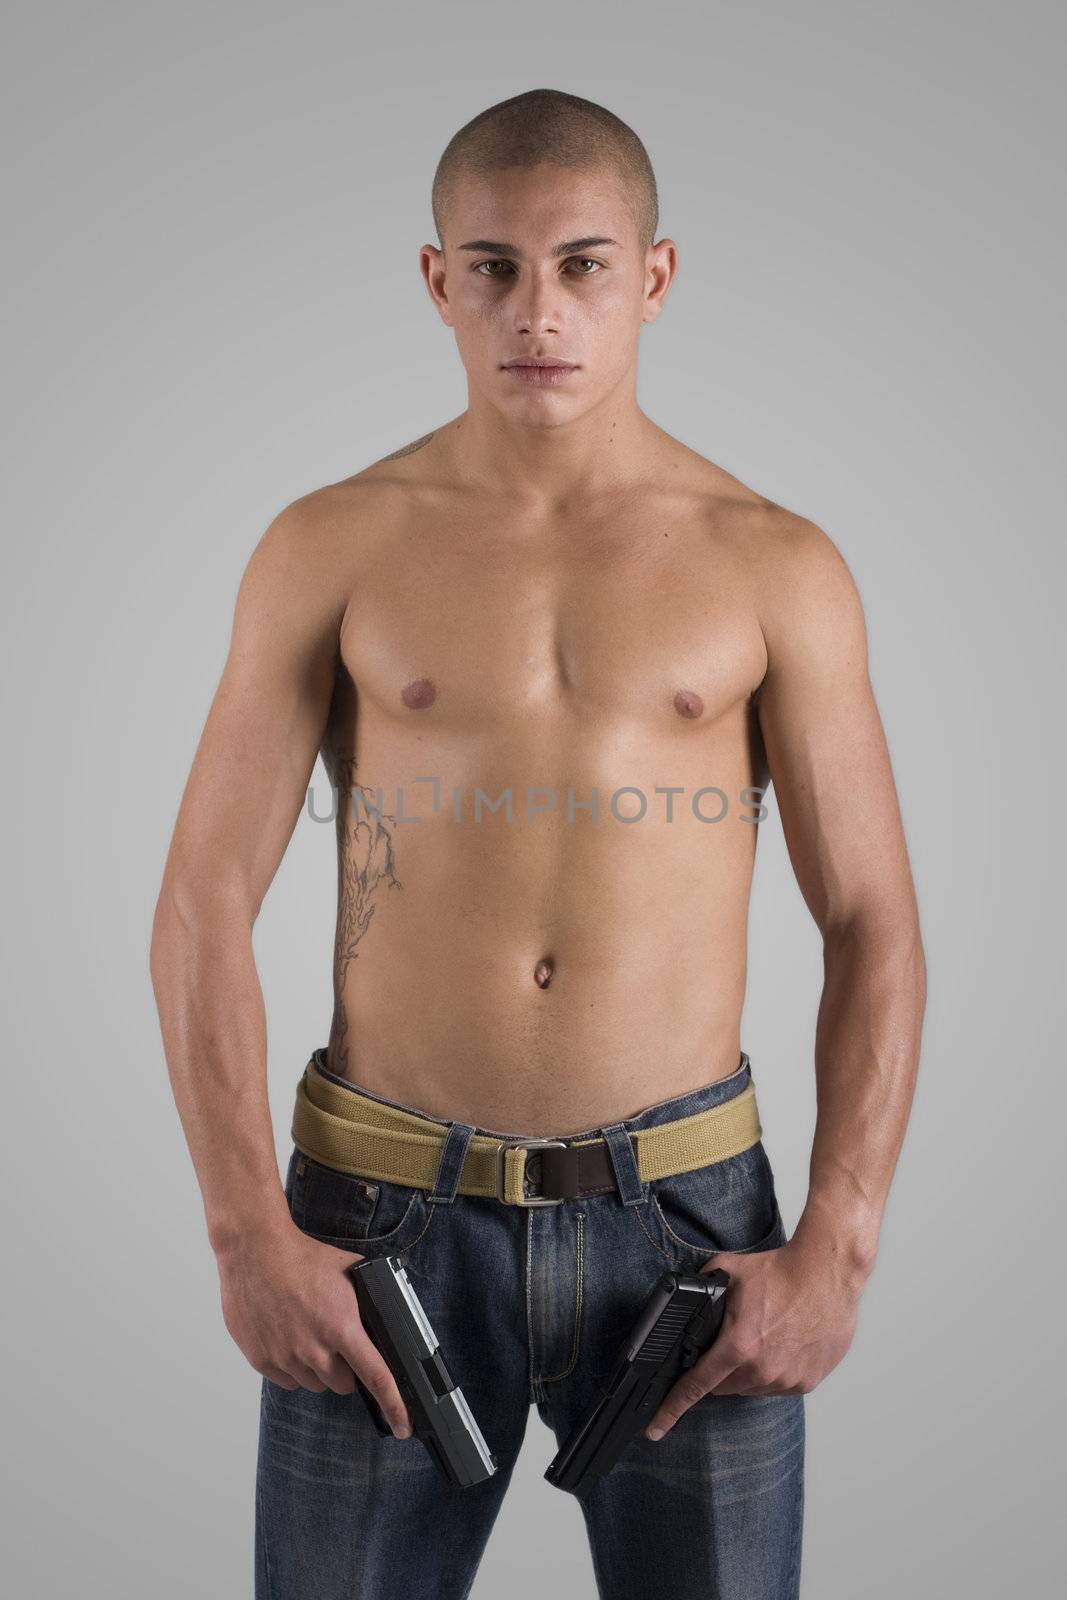 A young, muscular brazilian man in a studio shot on a gray background.